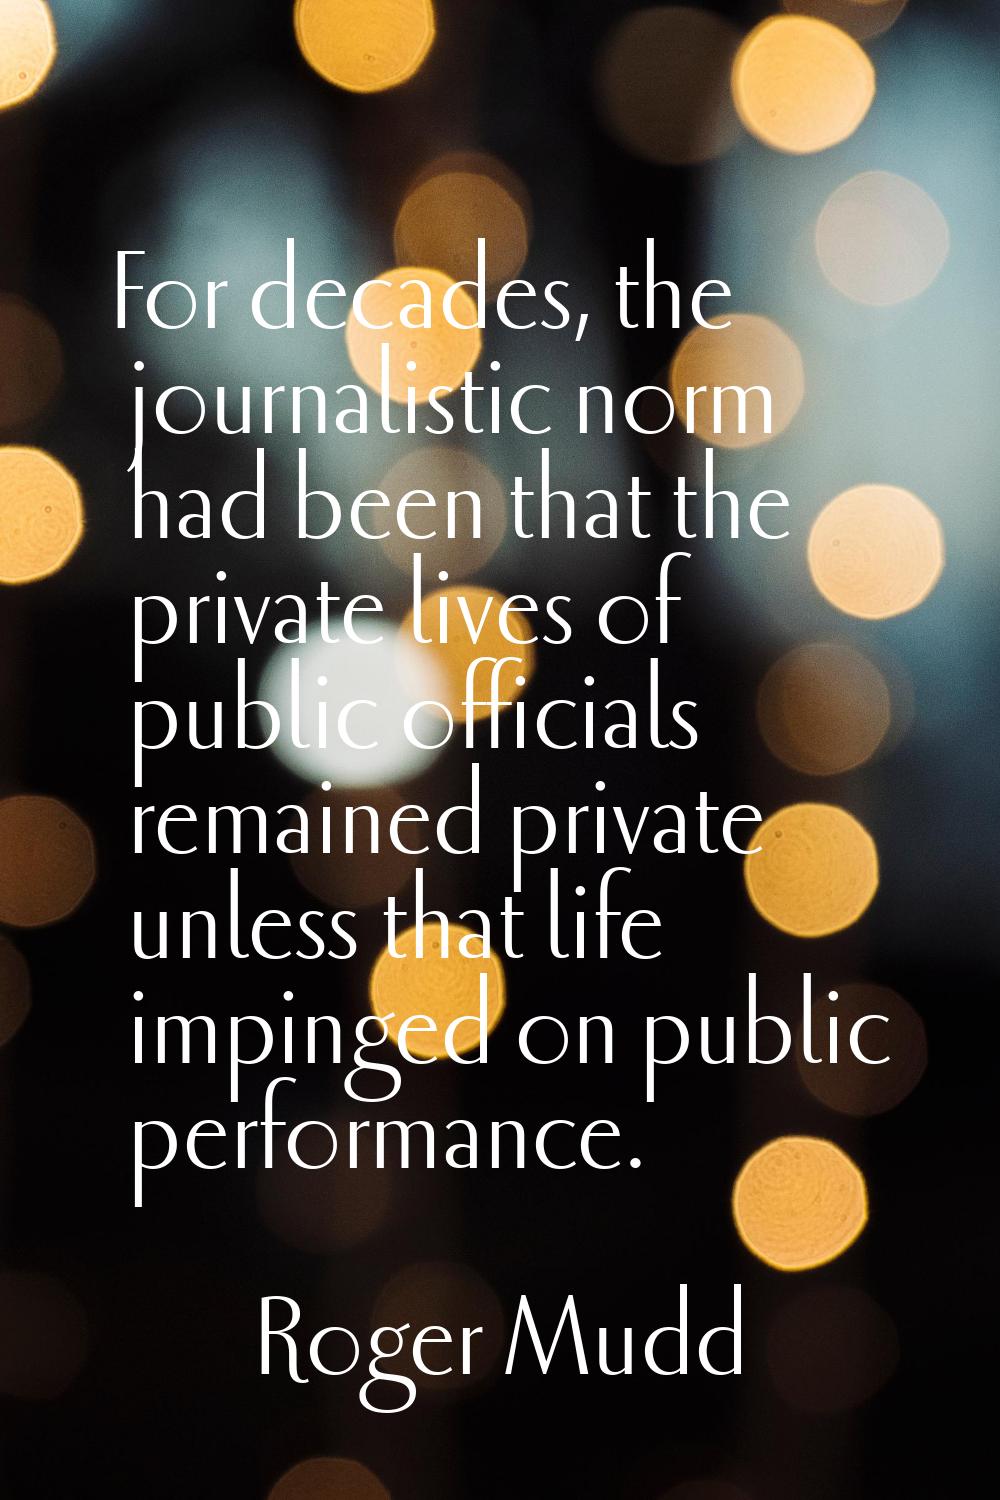 For decades, the journalistic norm had been that the private lives of public officials remained pri